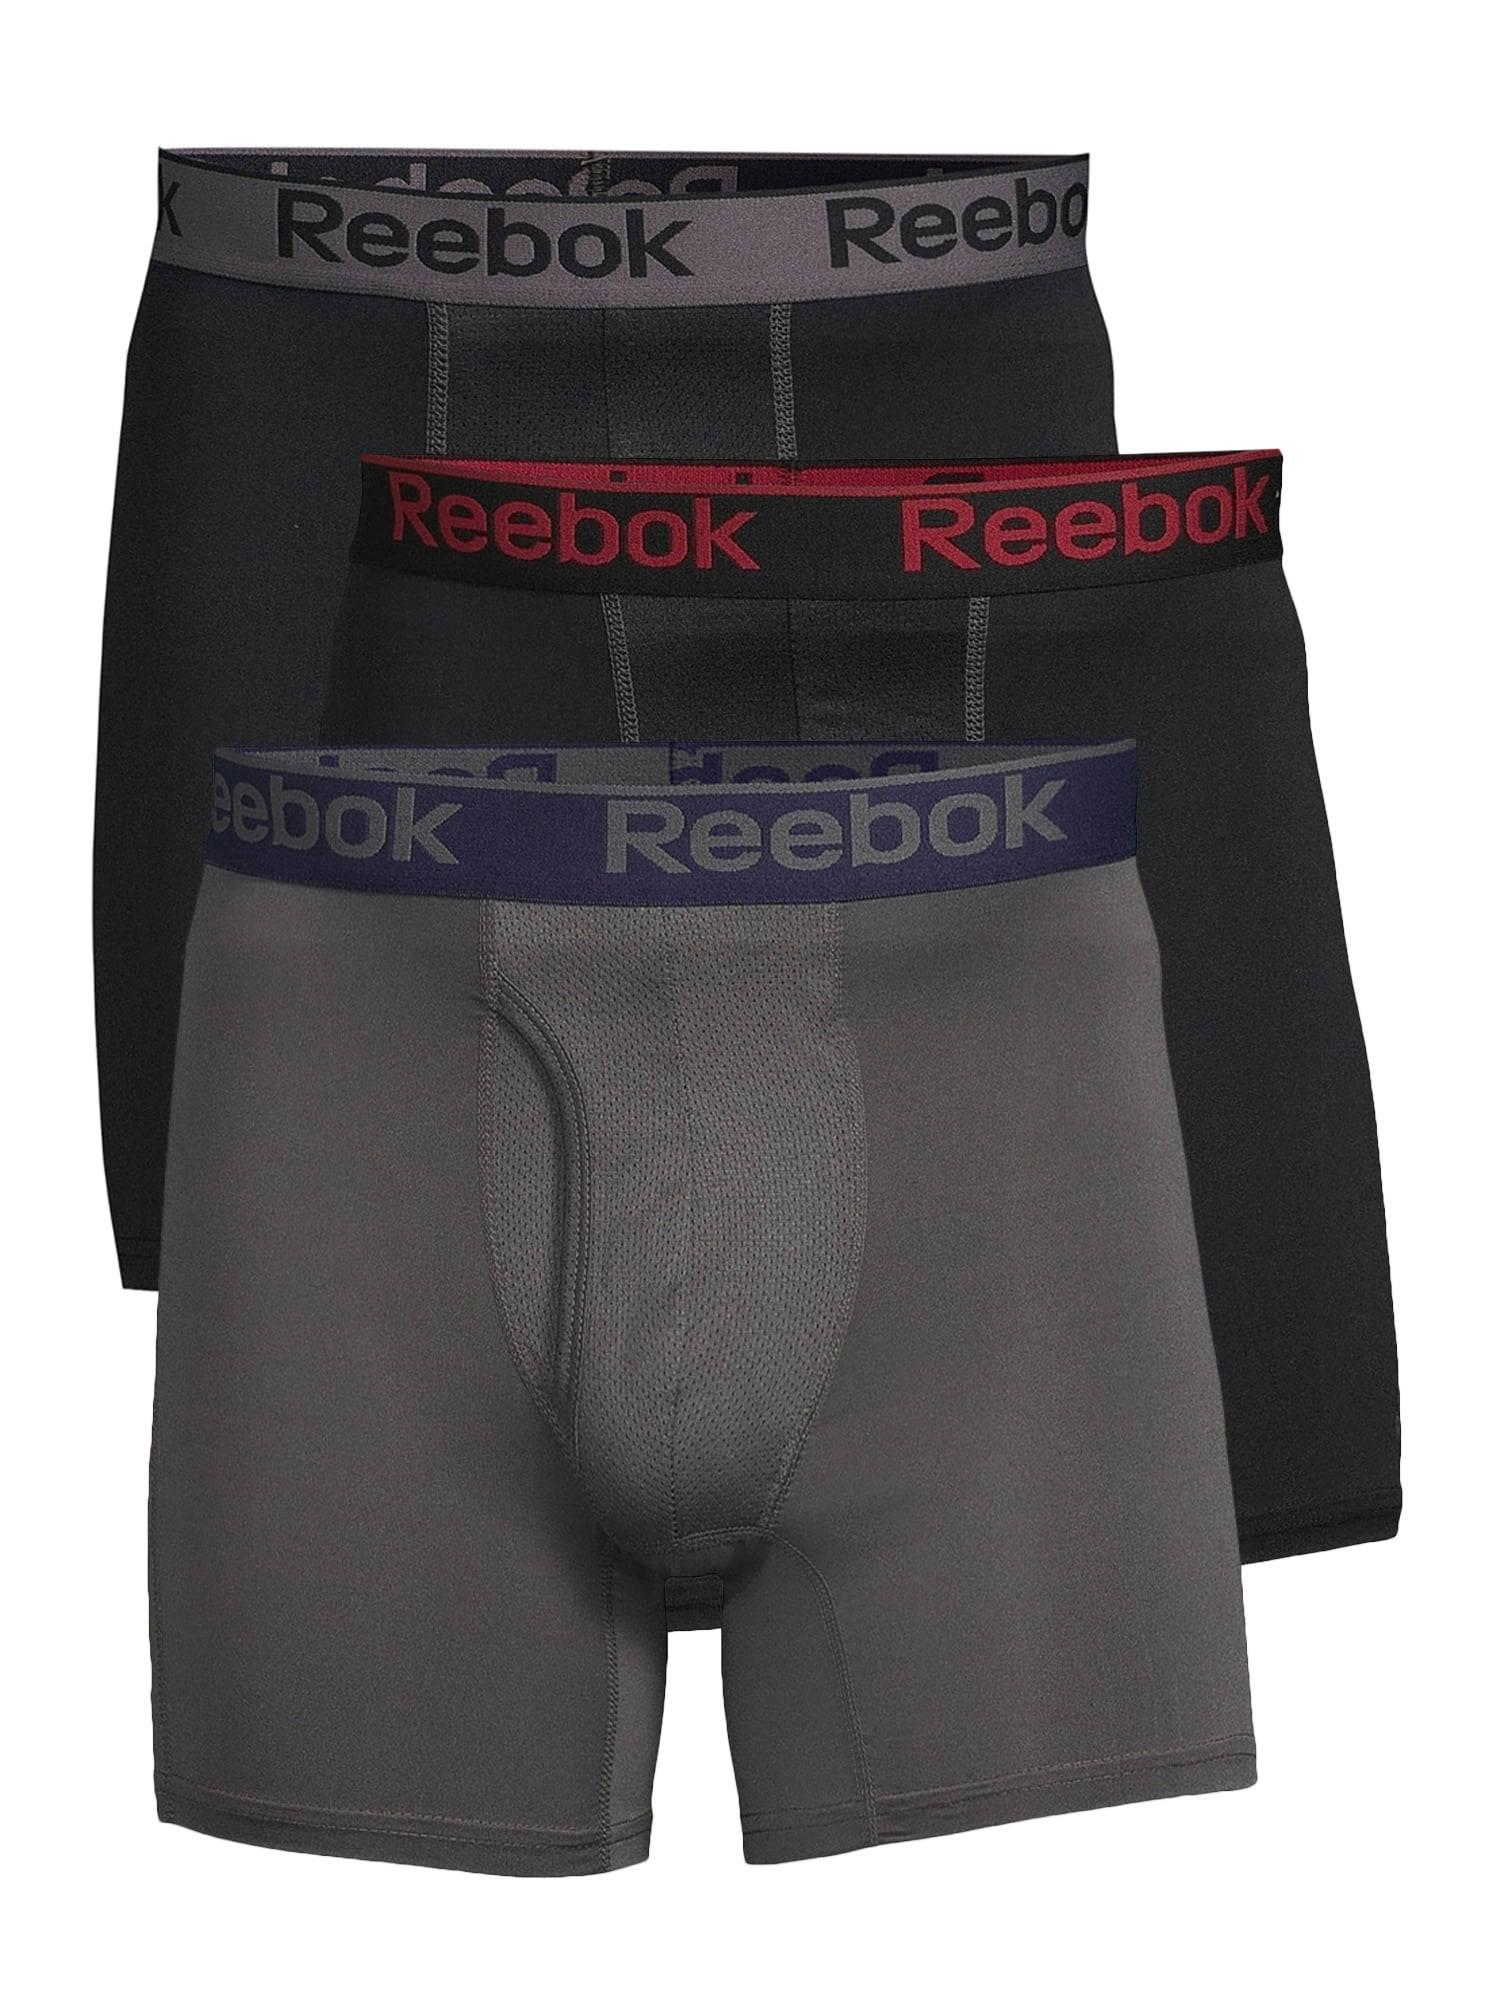 Reebok Men's Pro Series Performance Boxer Brief Extended Length ...